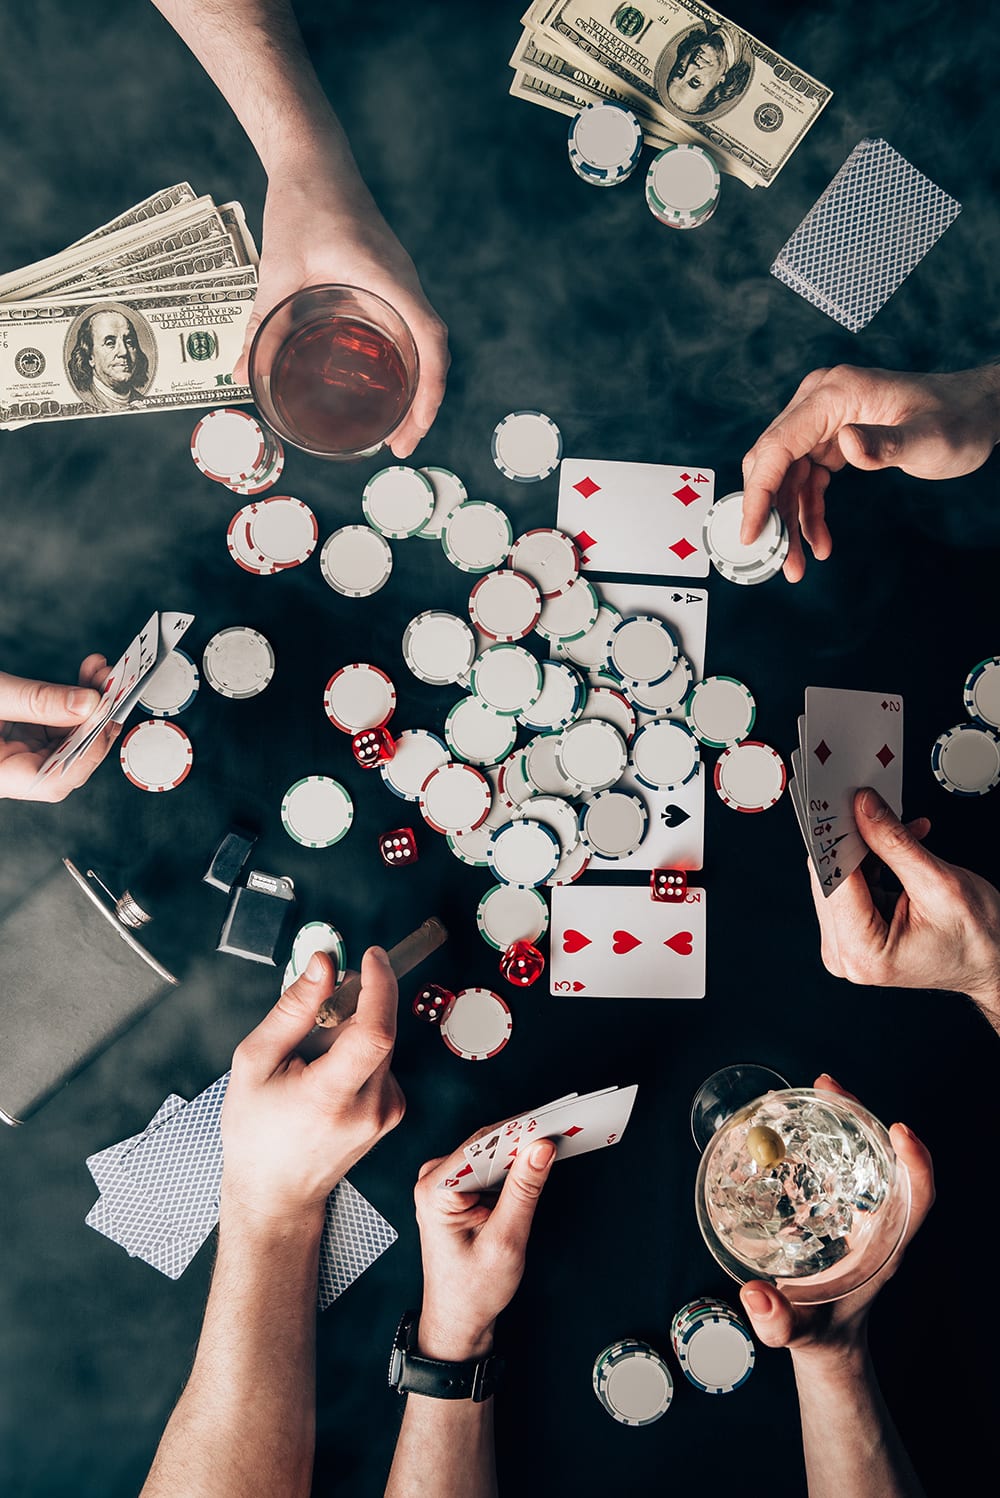 Is investing in the stock market like gambling?